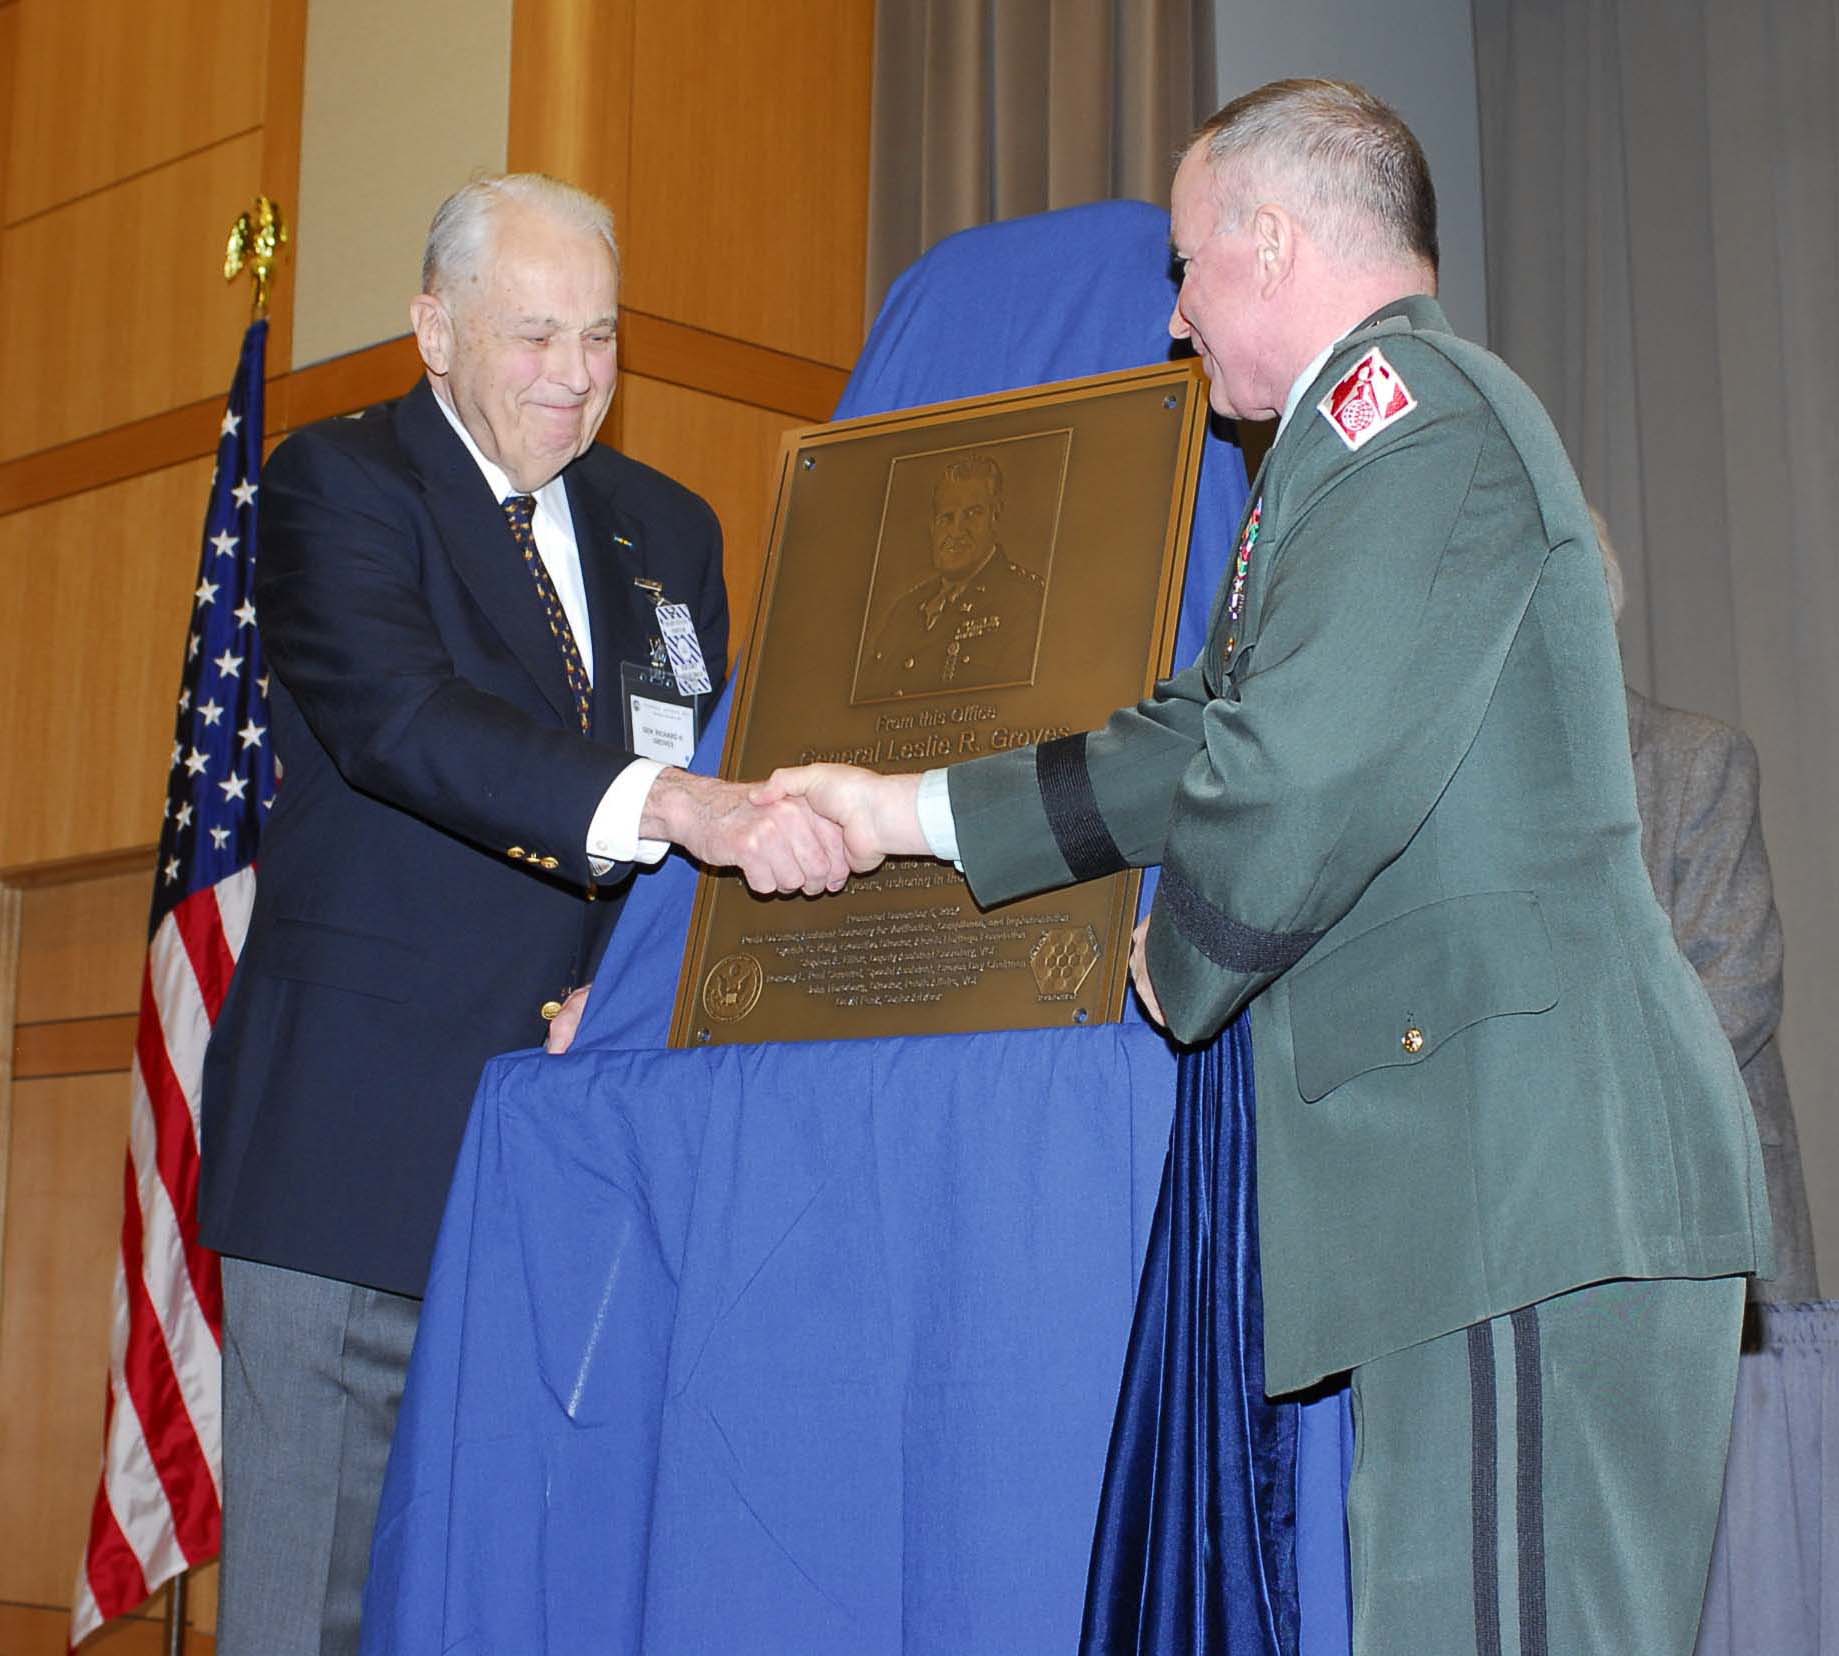 Maj. General Meredith Temple presenting a plaque to Richard Groves